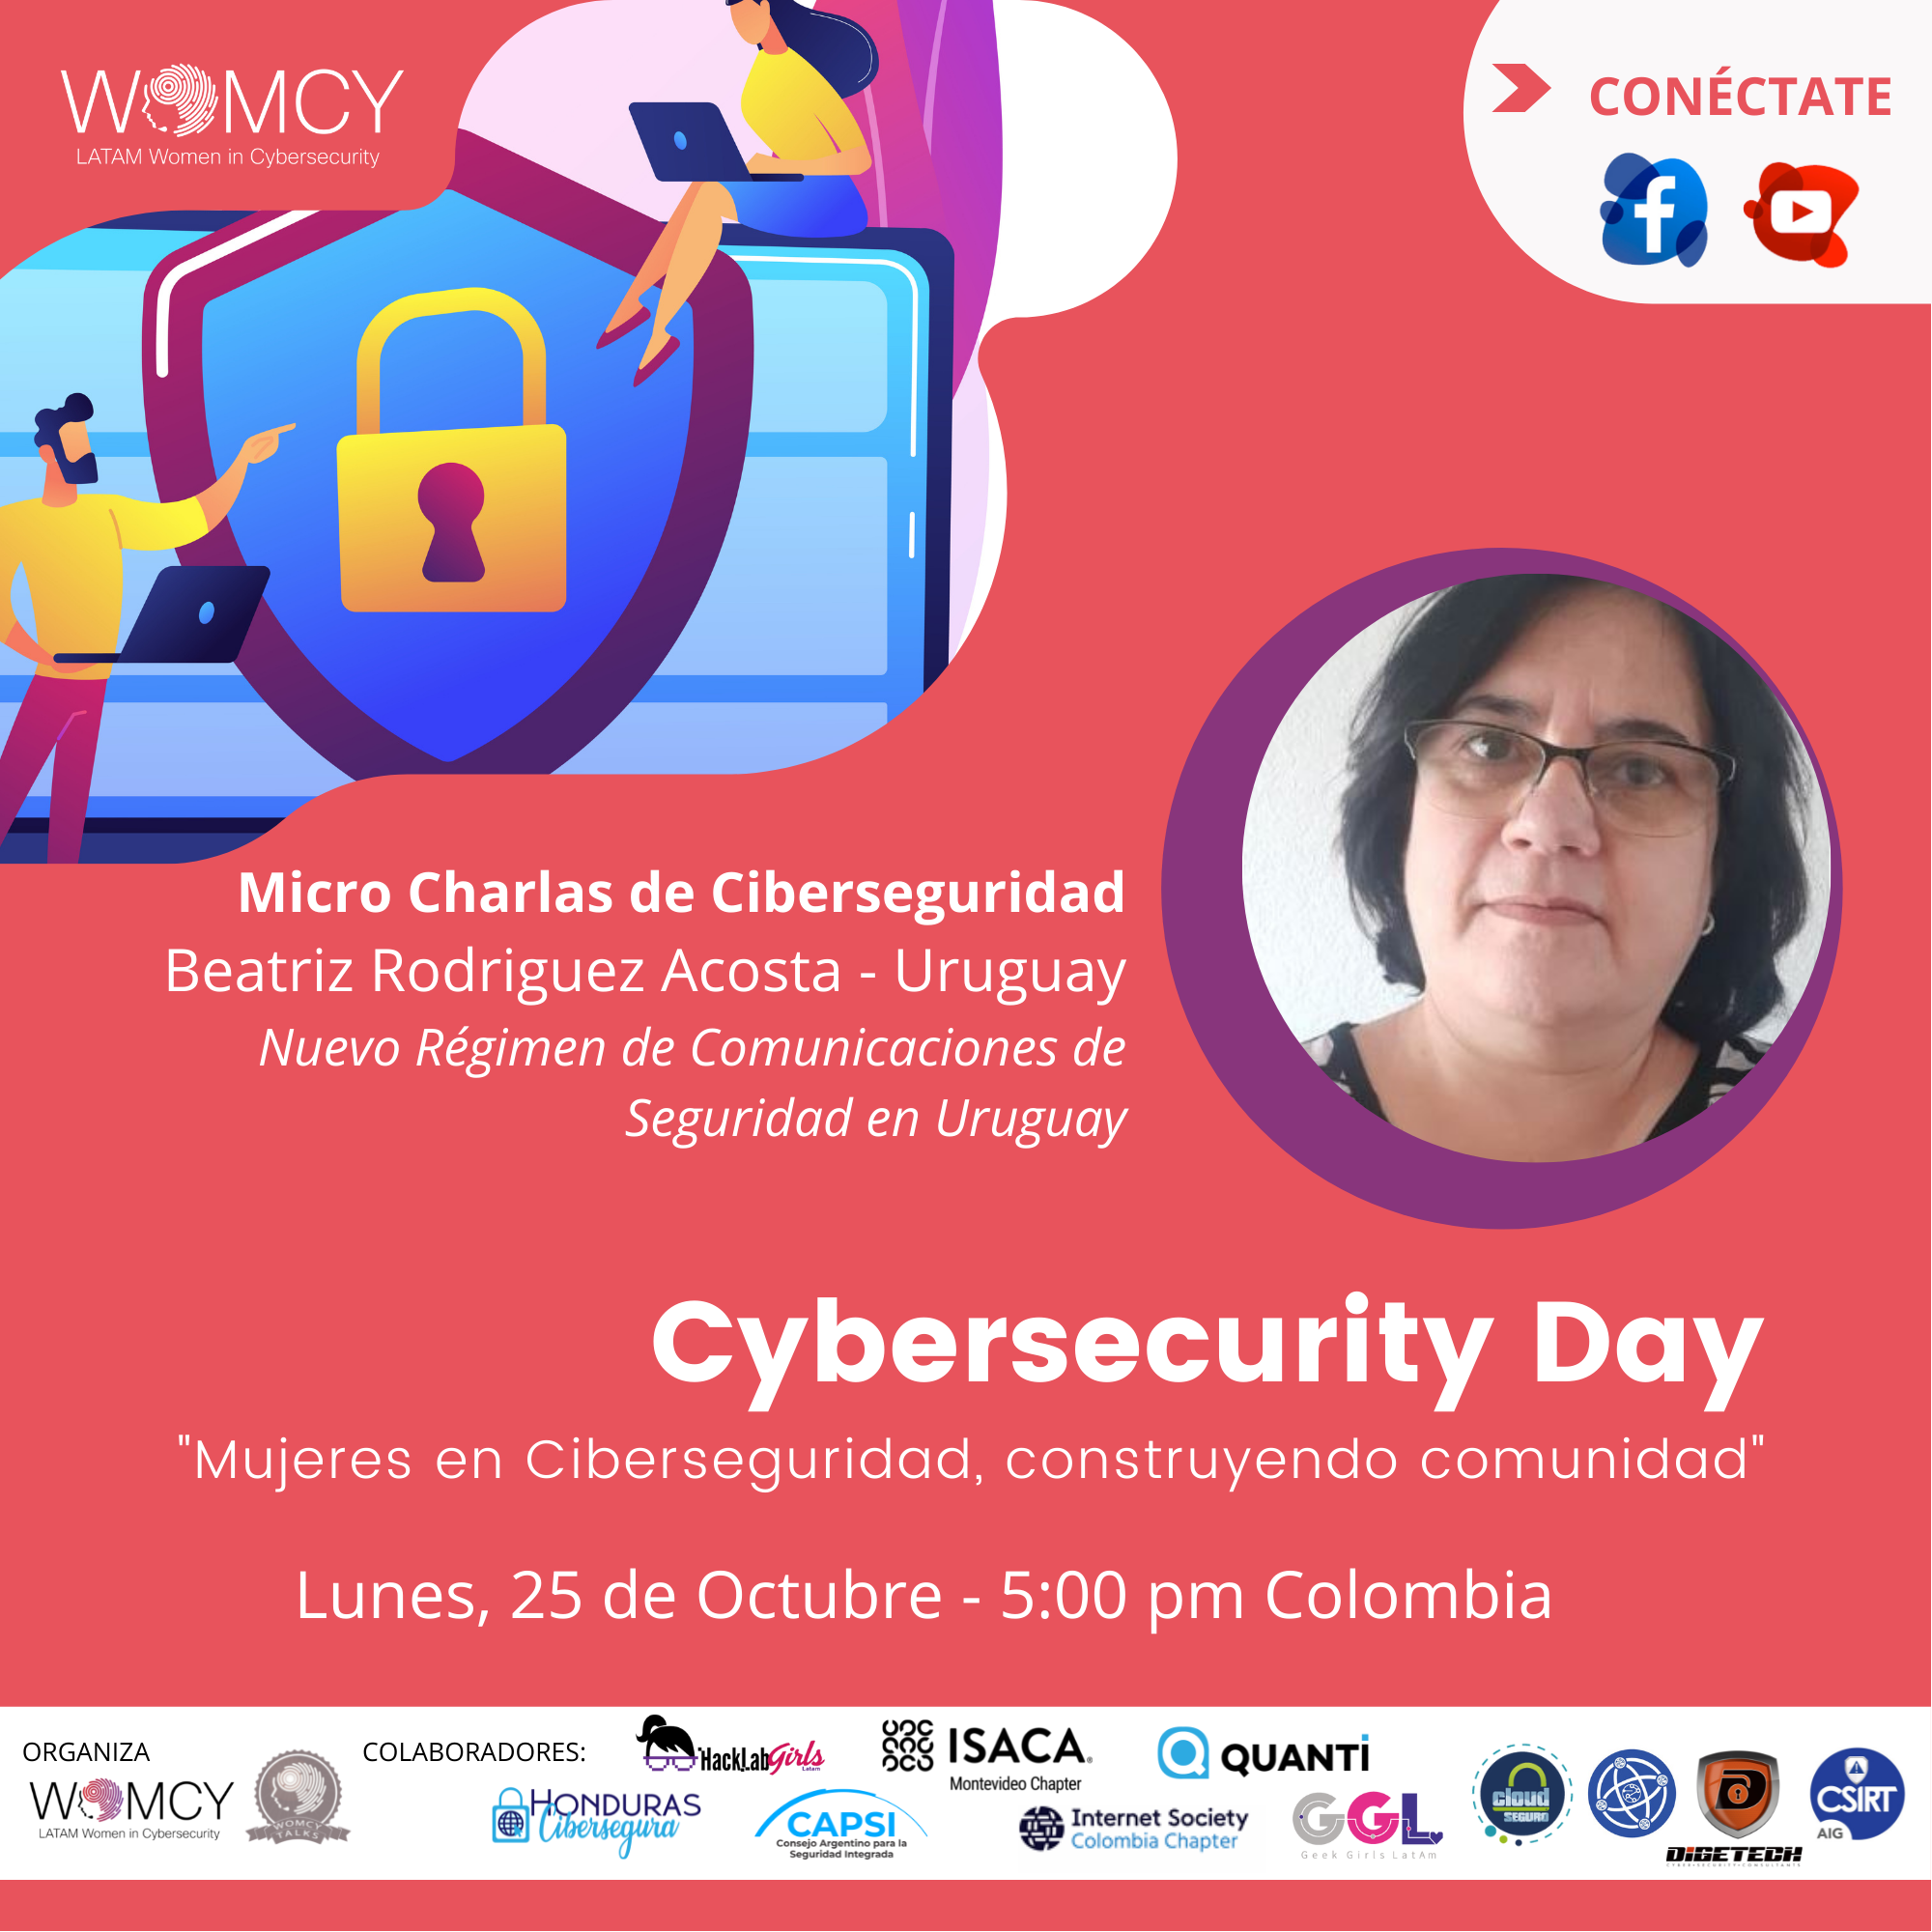 Imagen alusiva a Cybersecurity Day